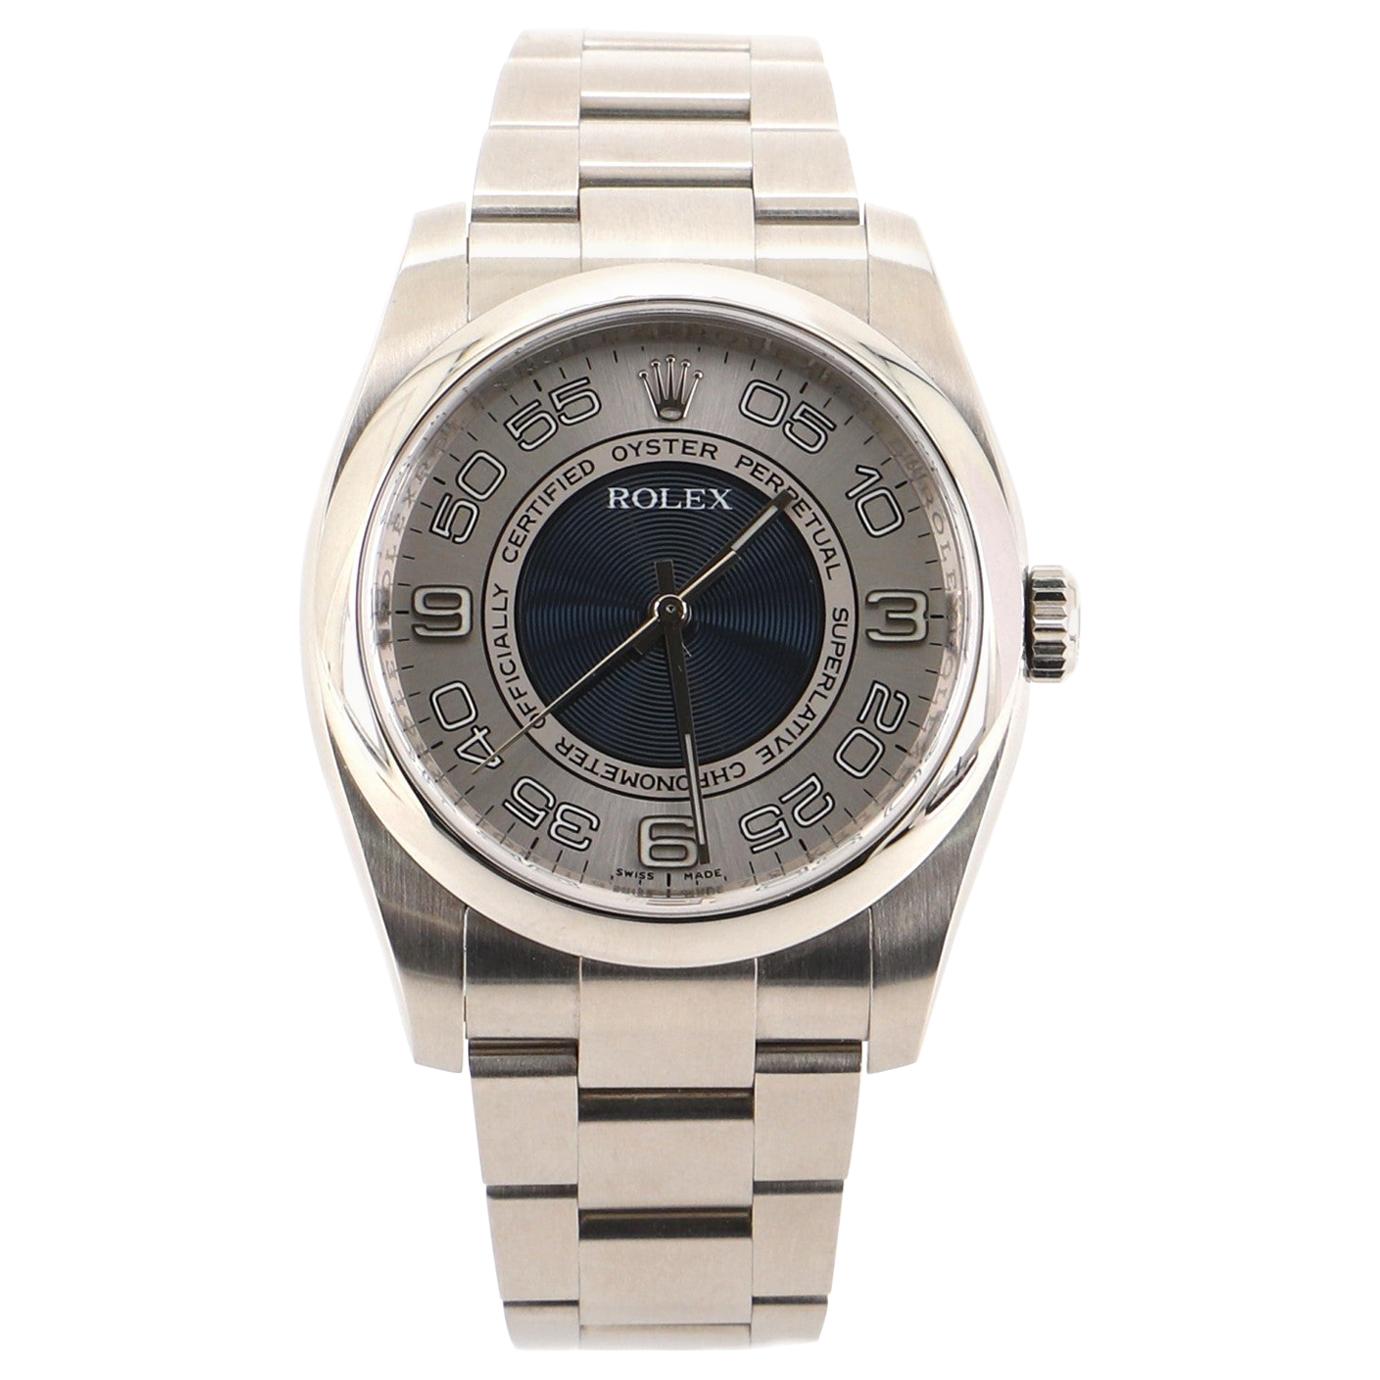 Rolex Oyster Perpetual Random Roulette Automatic Stainless Steel 36 Watch